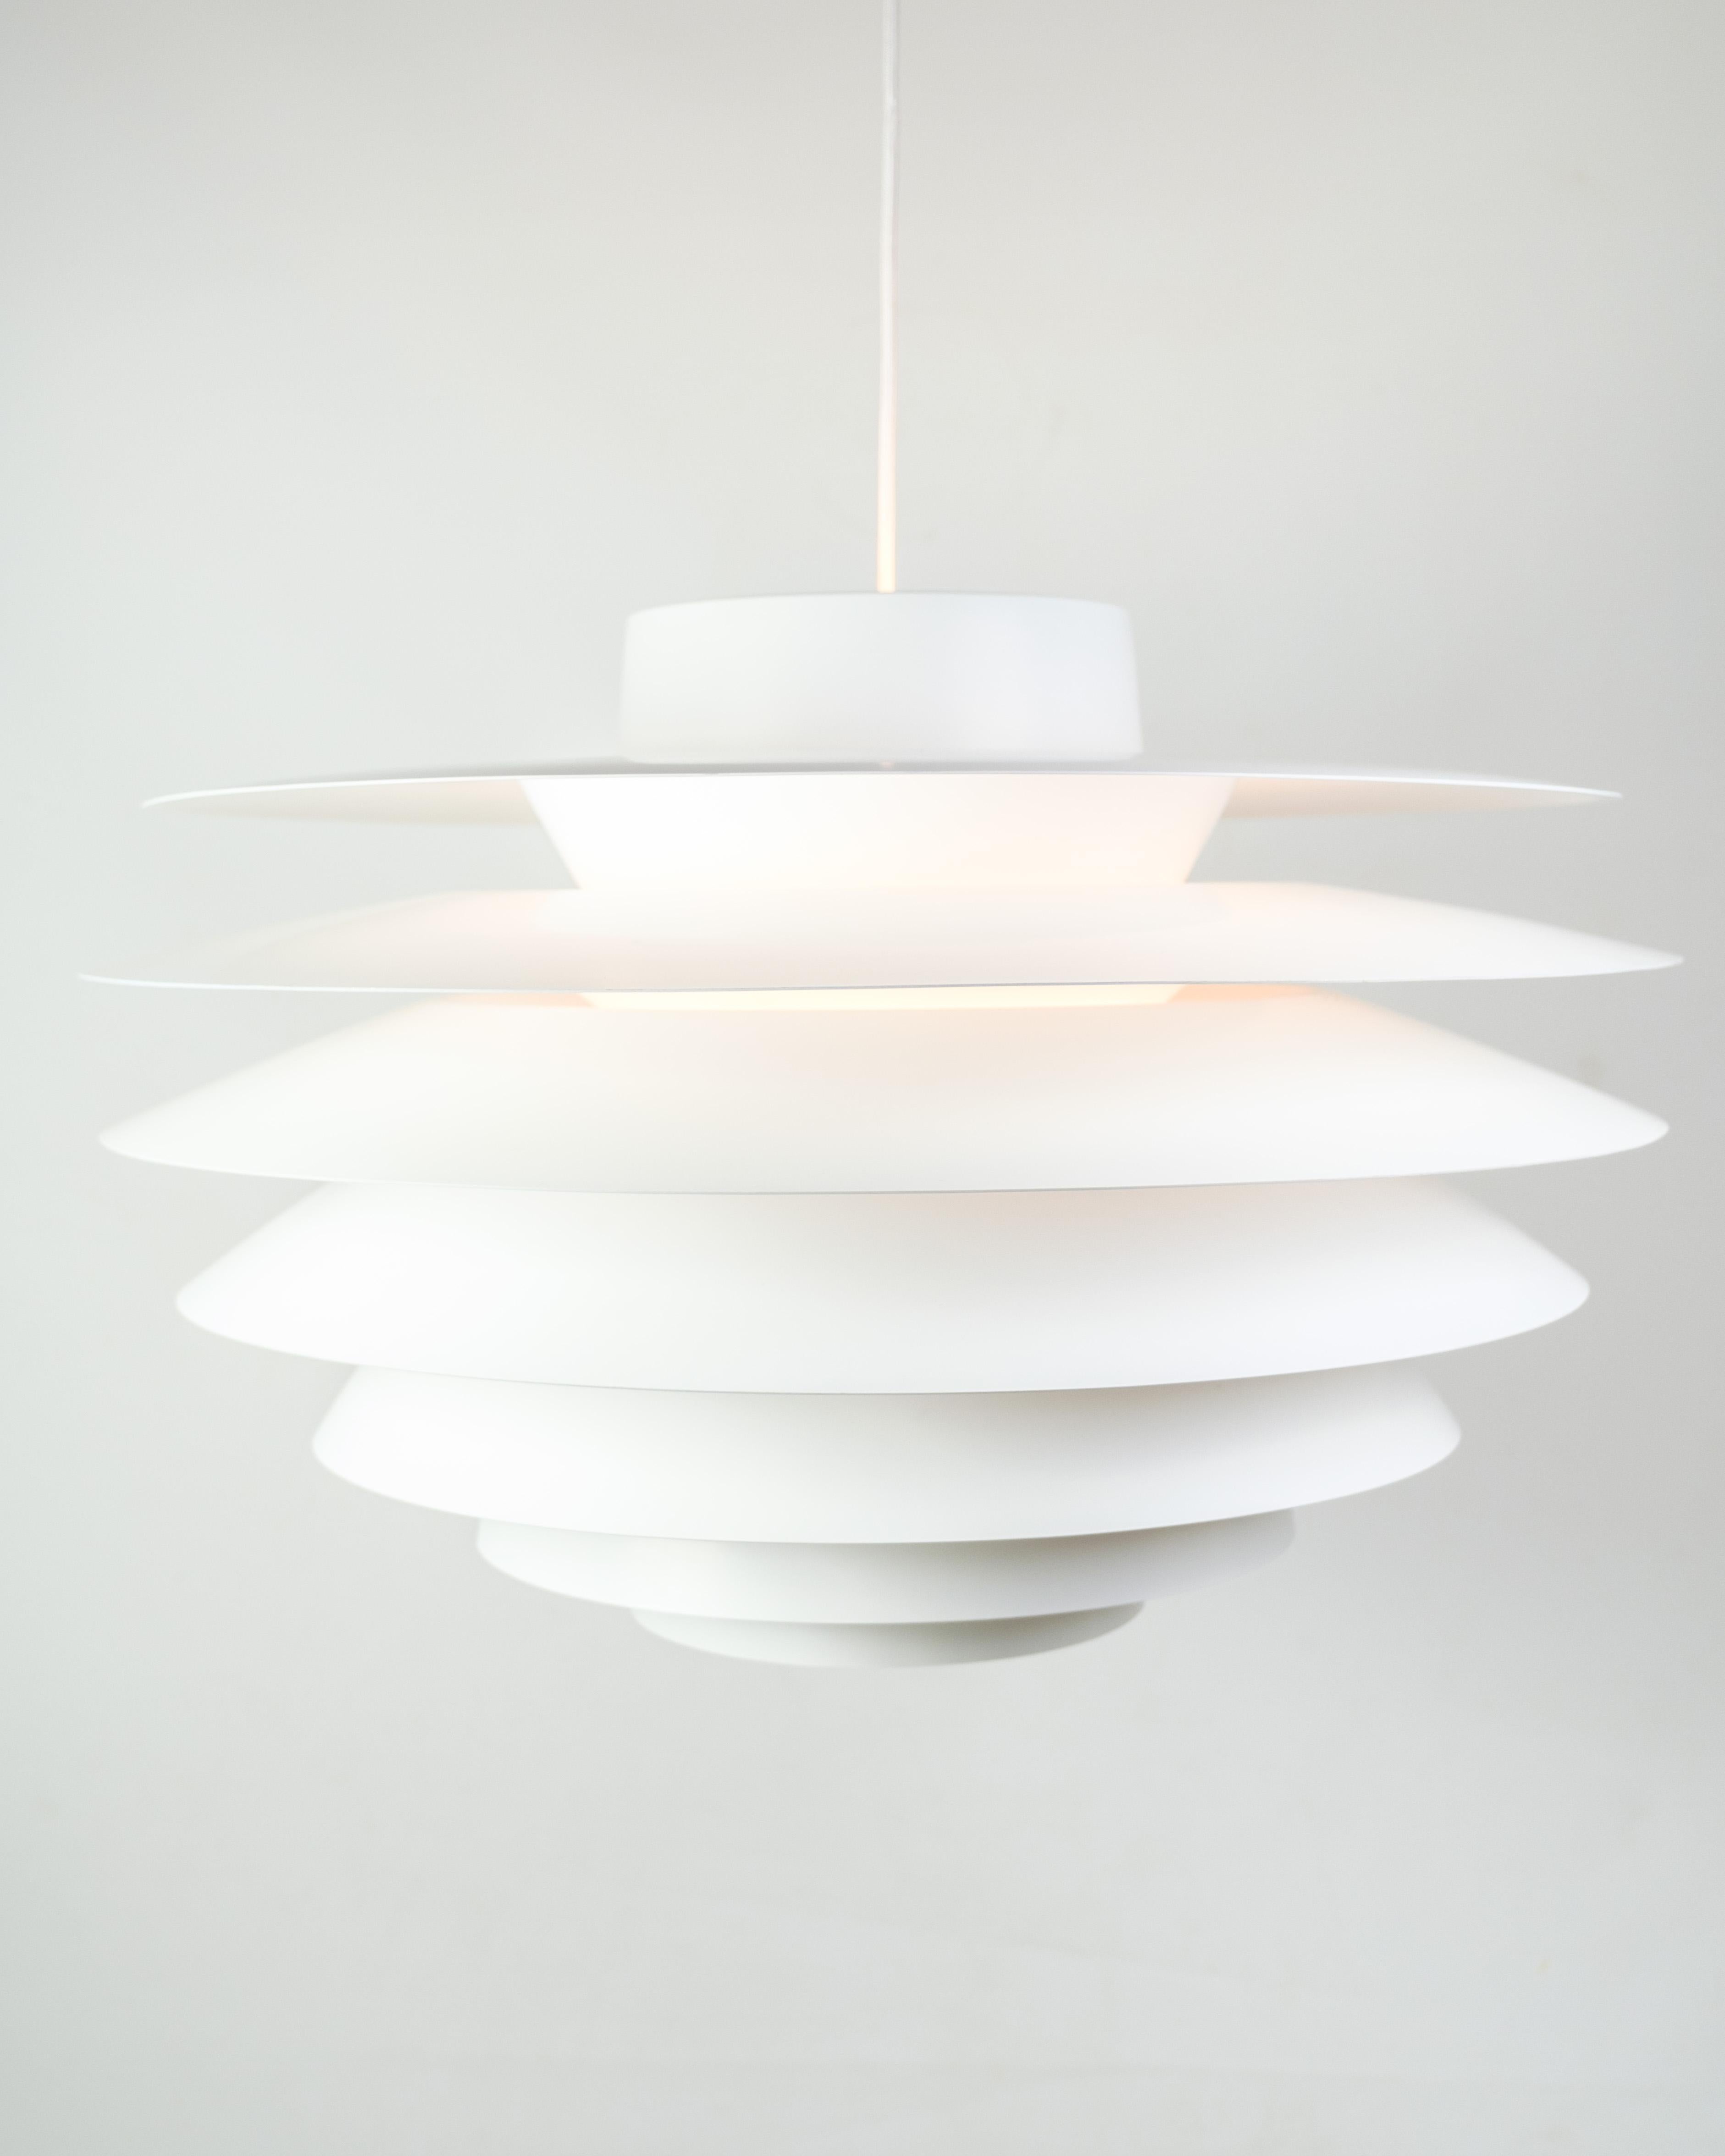 Oval ceiling lamp designed by the renowned Sven Middelboe and produced by Thorn, carries elegance and timeless beauty with its unique design. Created with care and precision, this lamp, known as the Verona model, is a masterpiece from the 1990s era